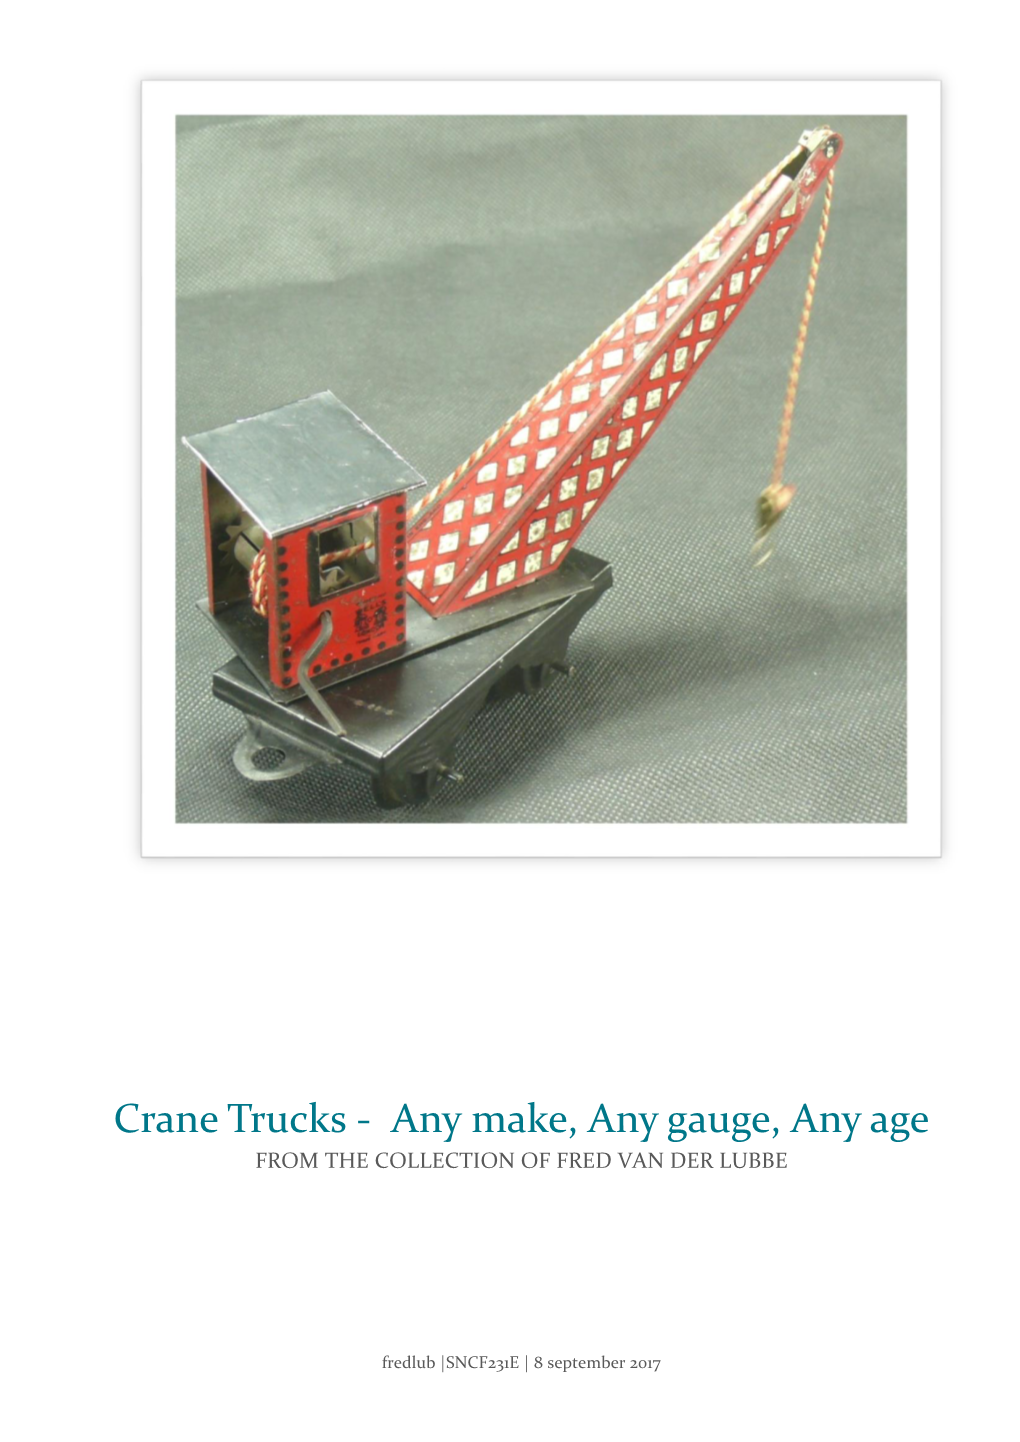 Crane Trucks - Any Make, Any Gauge, Any Age from the COLLECTION of FRED VAN DER LUBBE